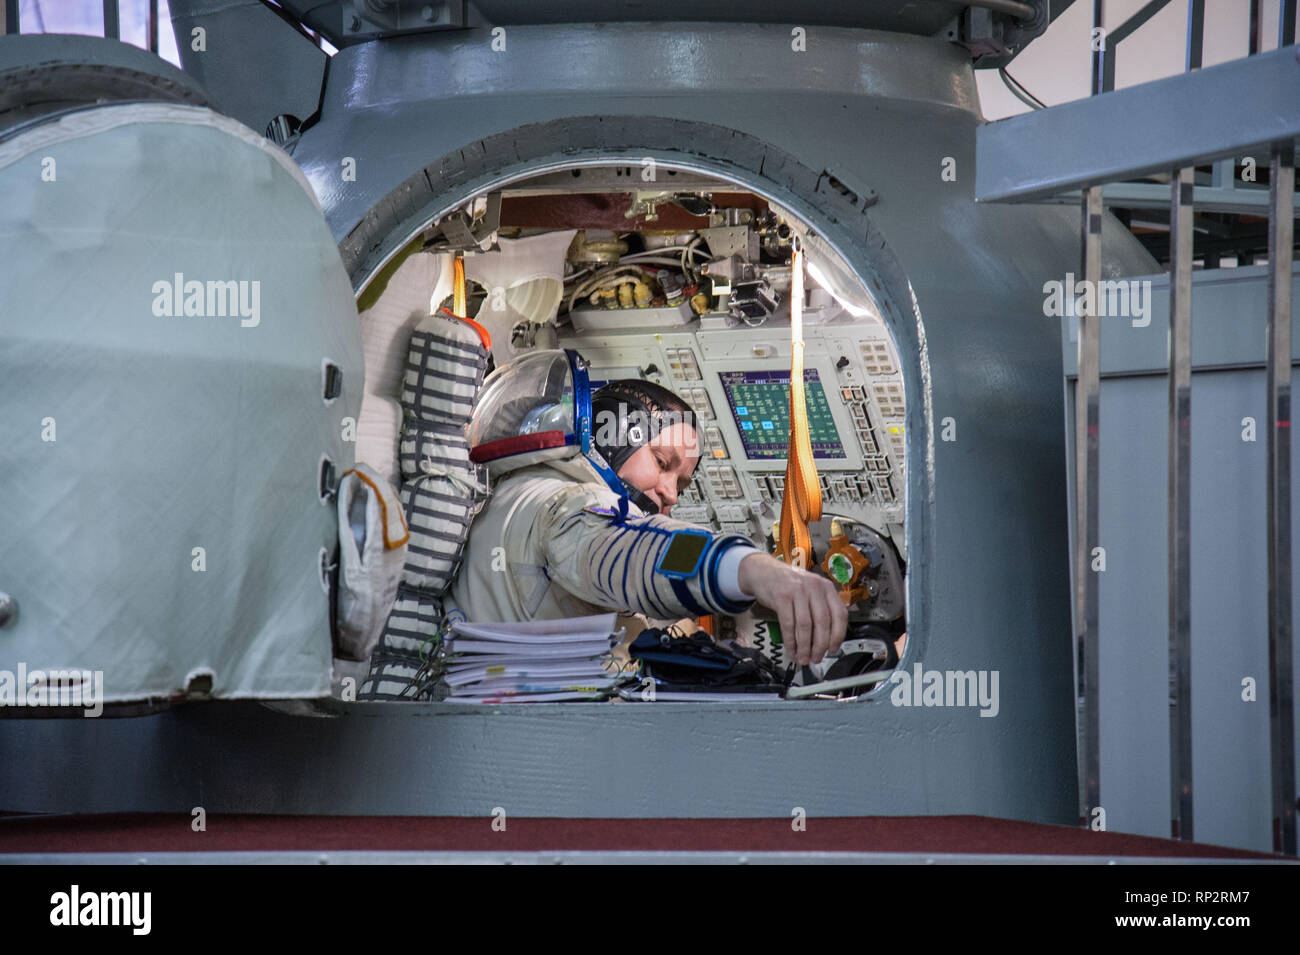 Star City, Russia. 20th Feb, 2019. International Space Station Expedition 59 crew member Alexey Ovchinin of Roscosmos works inside the Soyuz spacecraft simulator February 20, 2019 at Star City, Russia. The crew of Christina Koch, Alexey Ovchinin and Nick Hague will launch March 14th from the Baikonur Cosmodrome in Kazakhstan on the Soyuz MS-12 spacecraft for a six-and-a-half month mission on the International Space Station. Credit: Planetpix/Alamy Live News Stock Photo